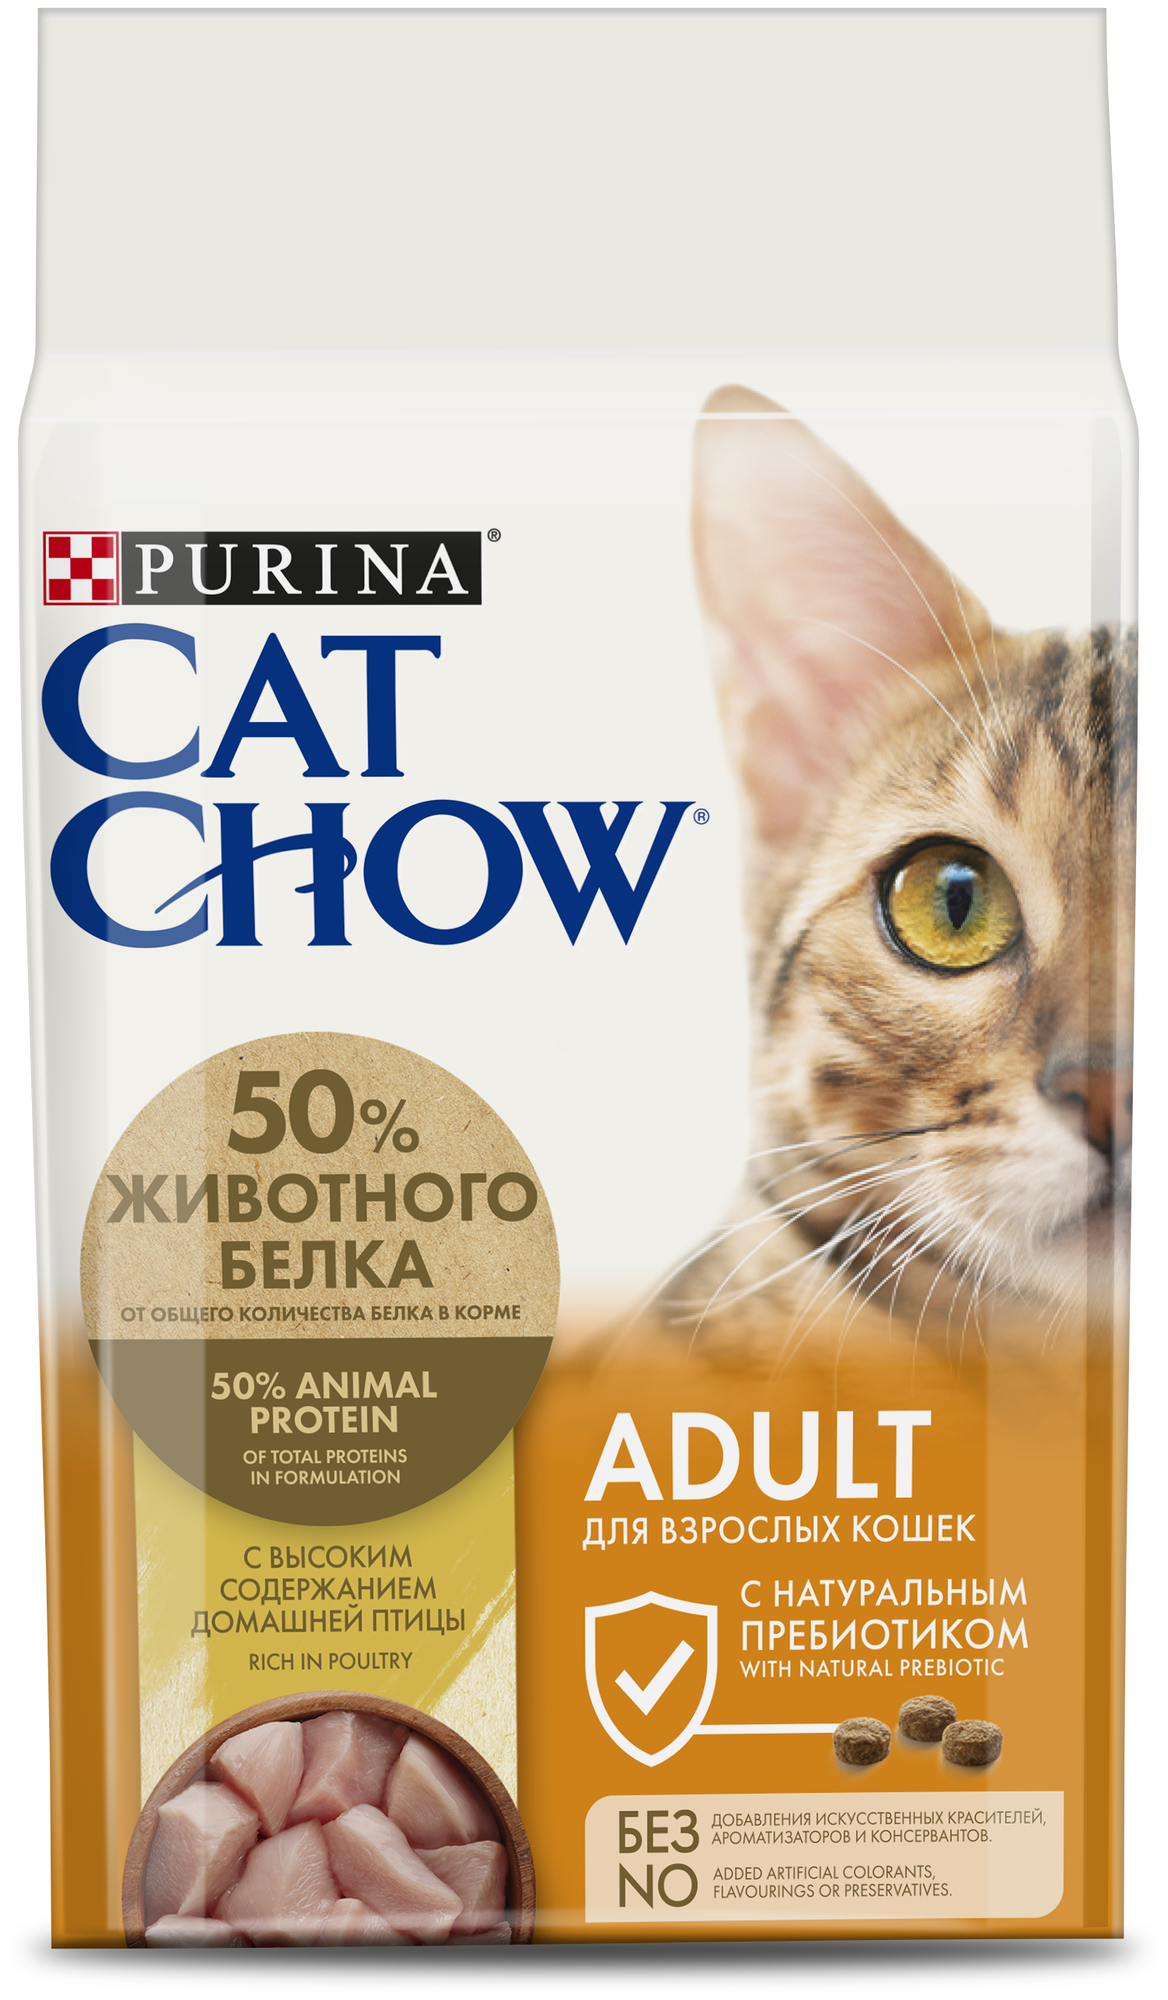      Purina Cat Chow Adult, 1.5 ,  